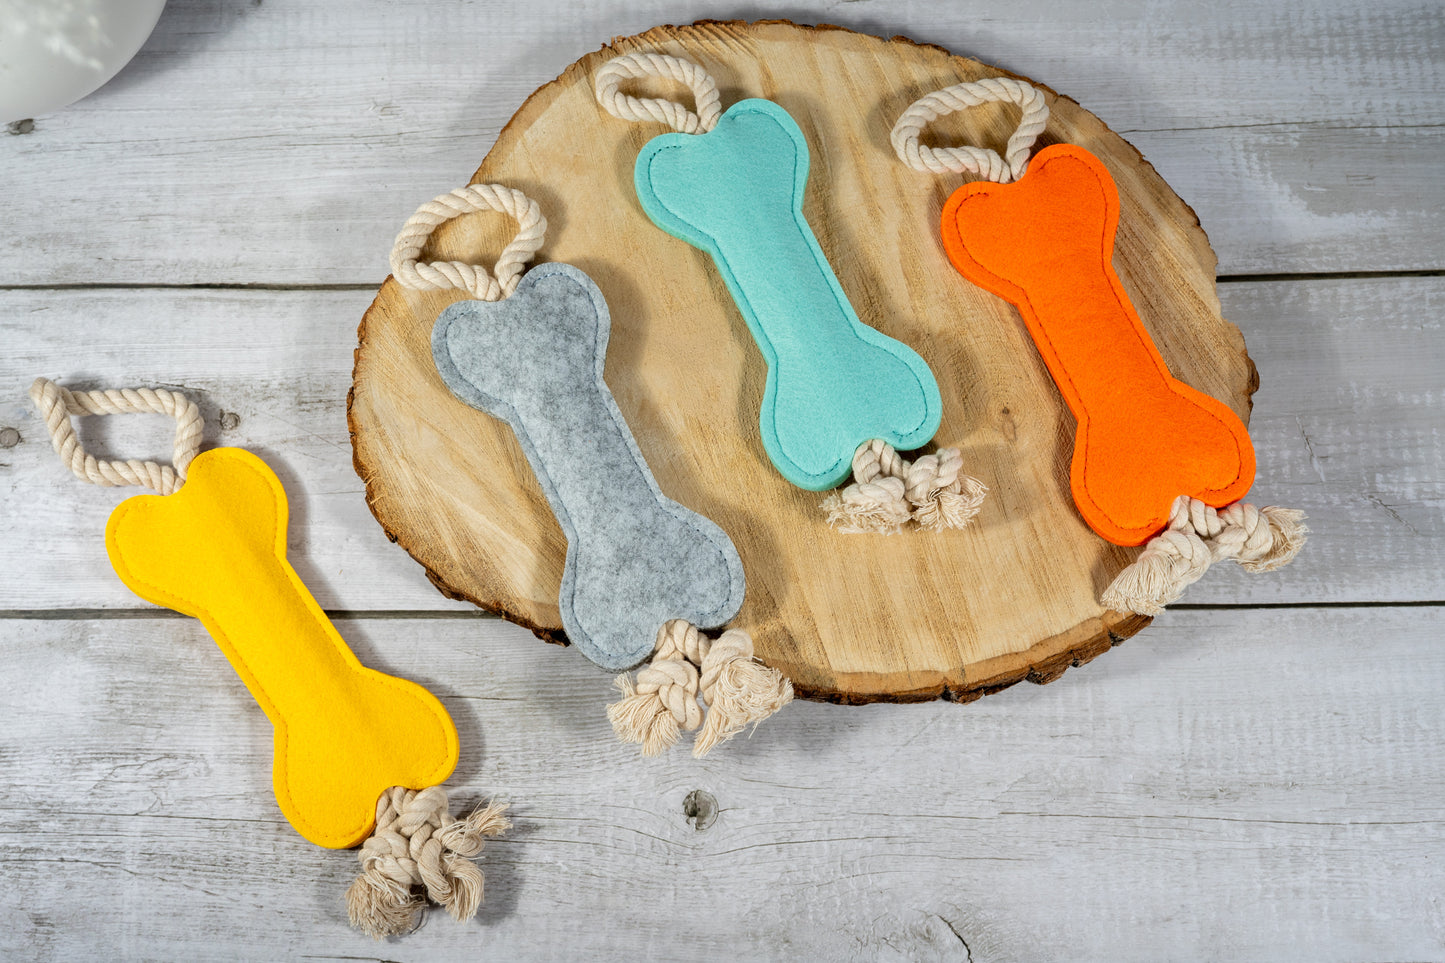 Felt bone dog toy with sturdy rope at the ends to encourage pulling.